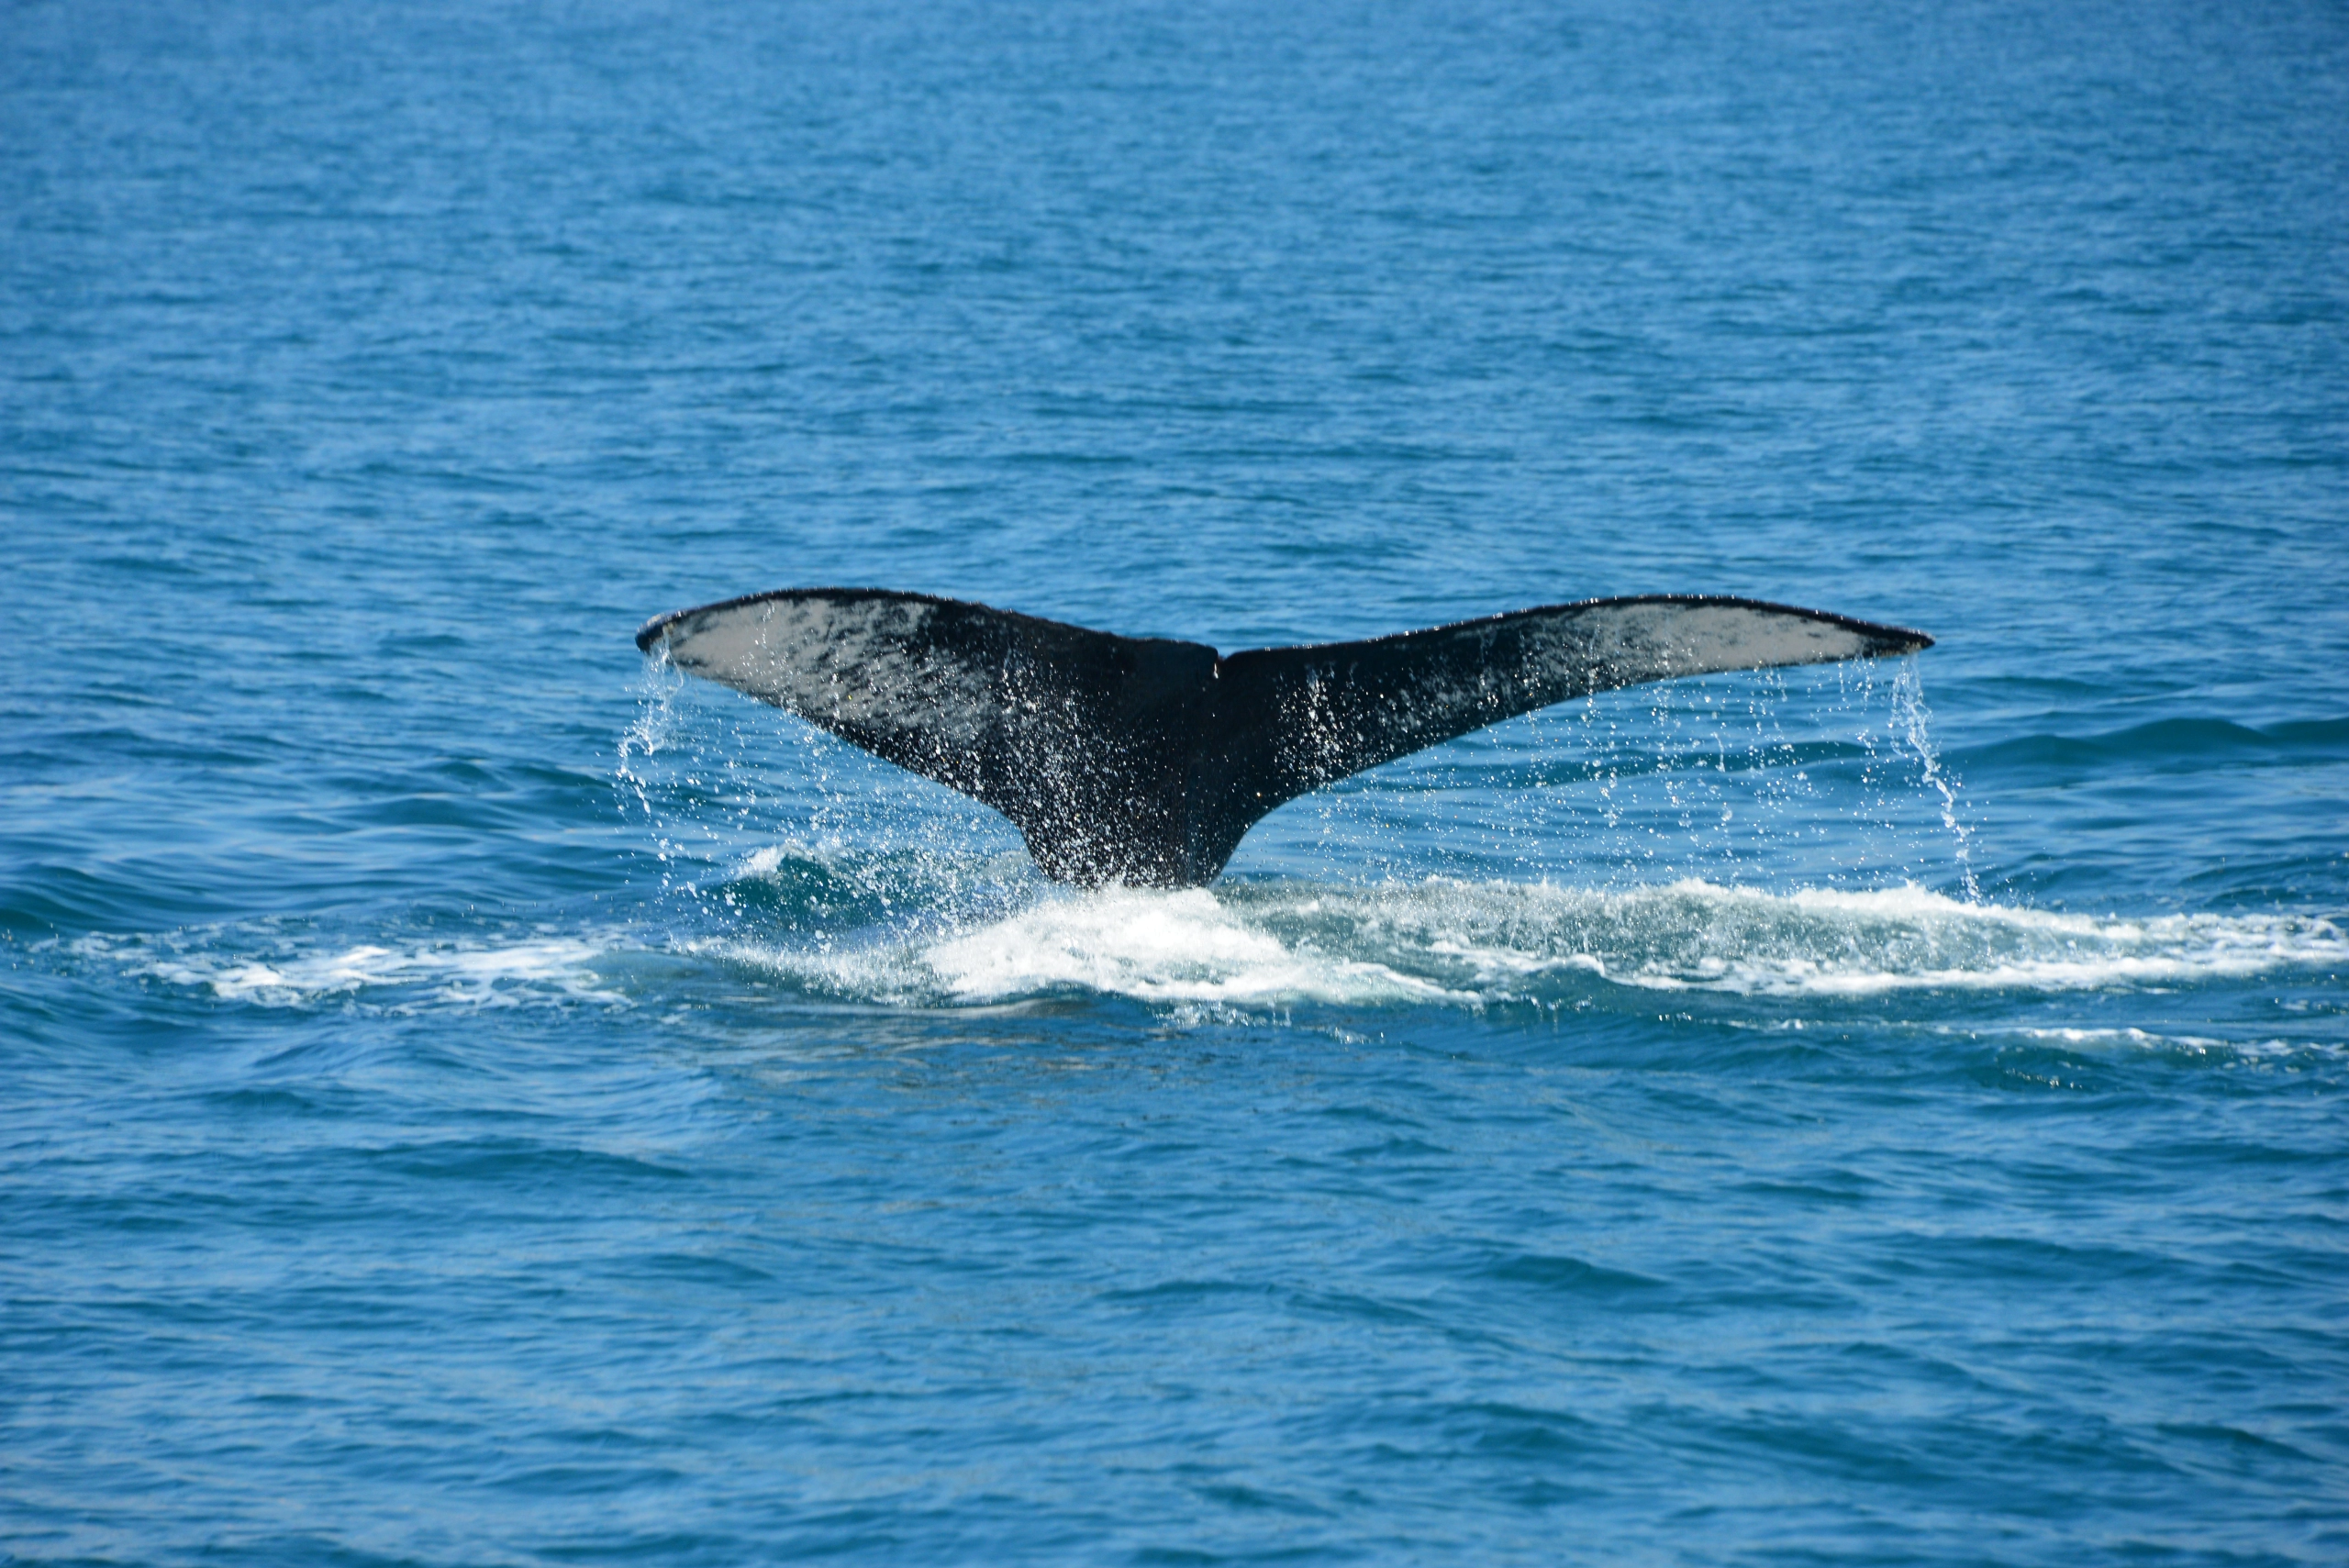 Looking to spot extraordinary whales? Costa Rica offers exceptional whale-watching tours!